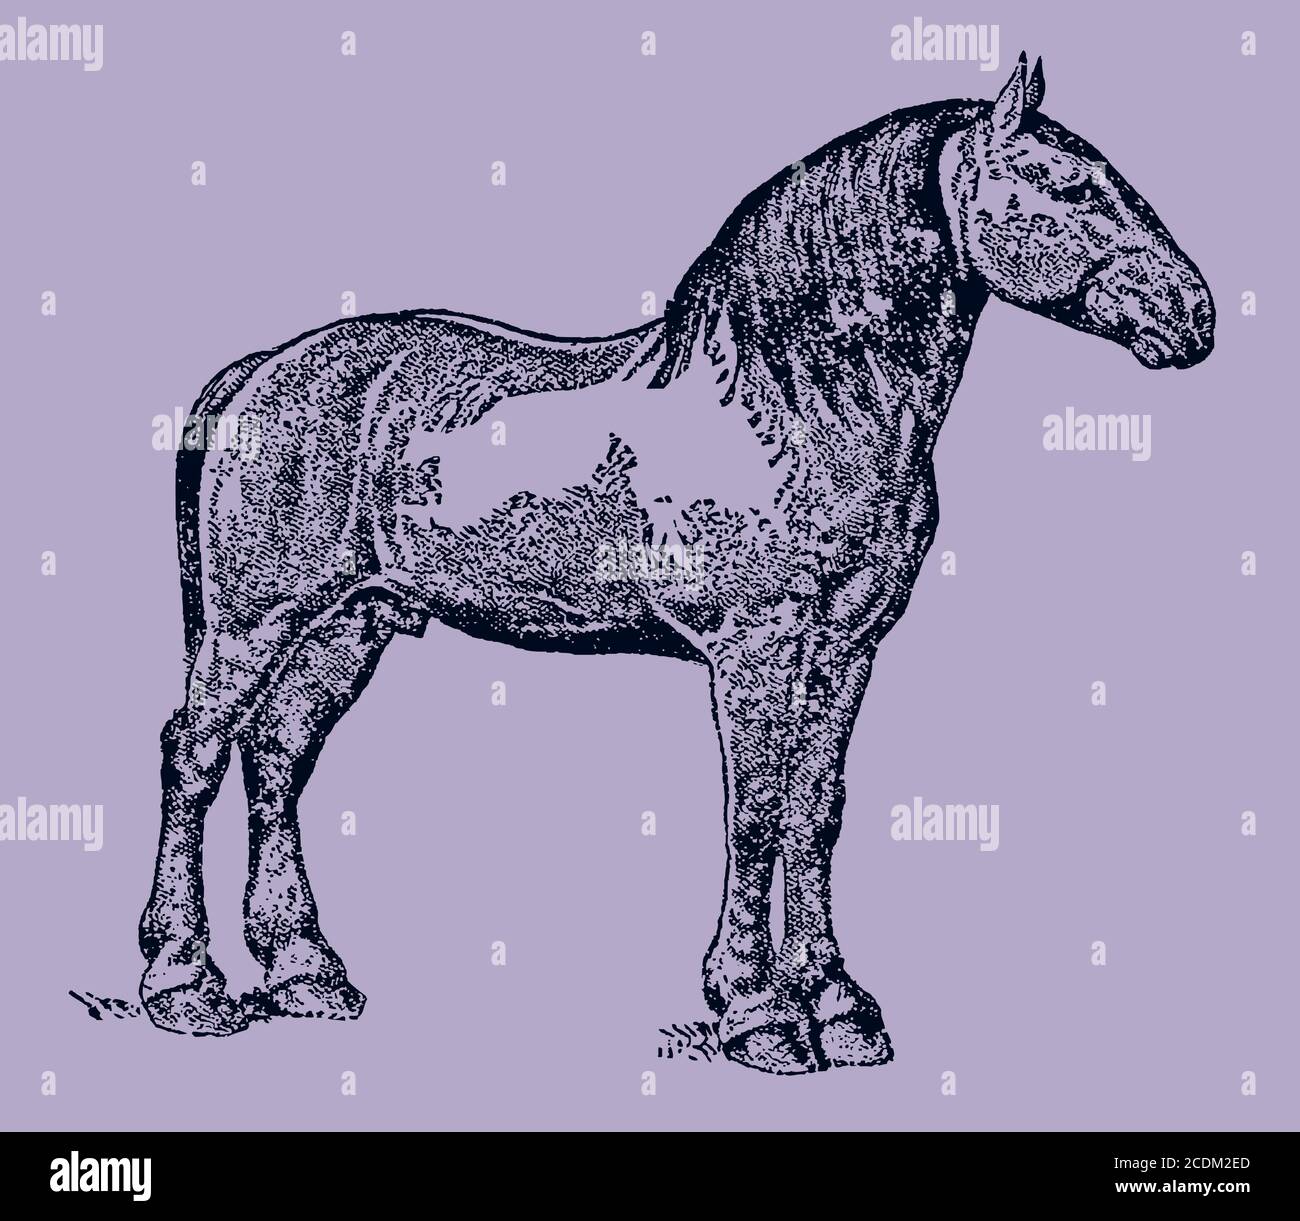 Percheron draft horse in side view on a purple-grey background, after an antique illustration from the 19th century. Editable in layers Stock Vector